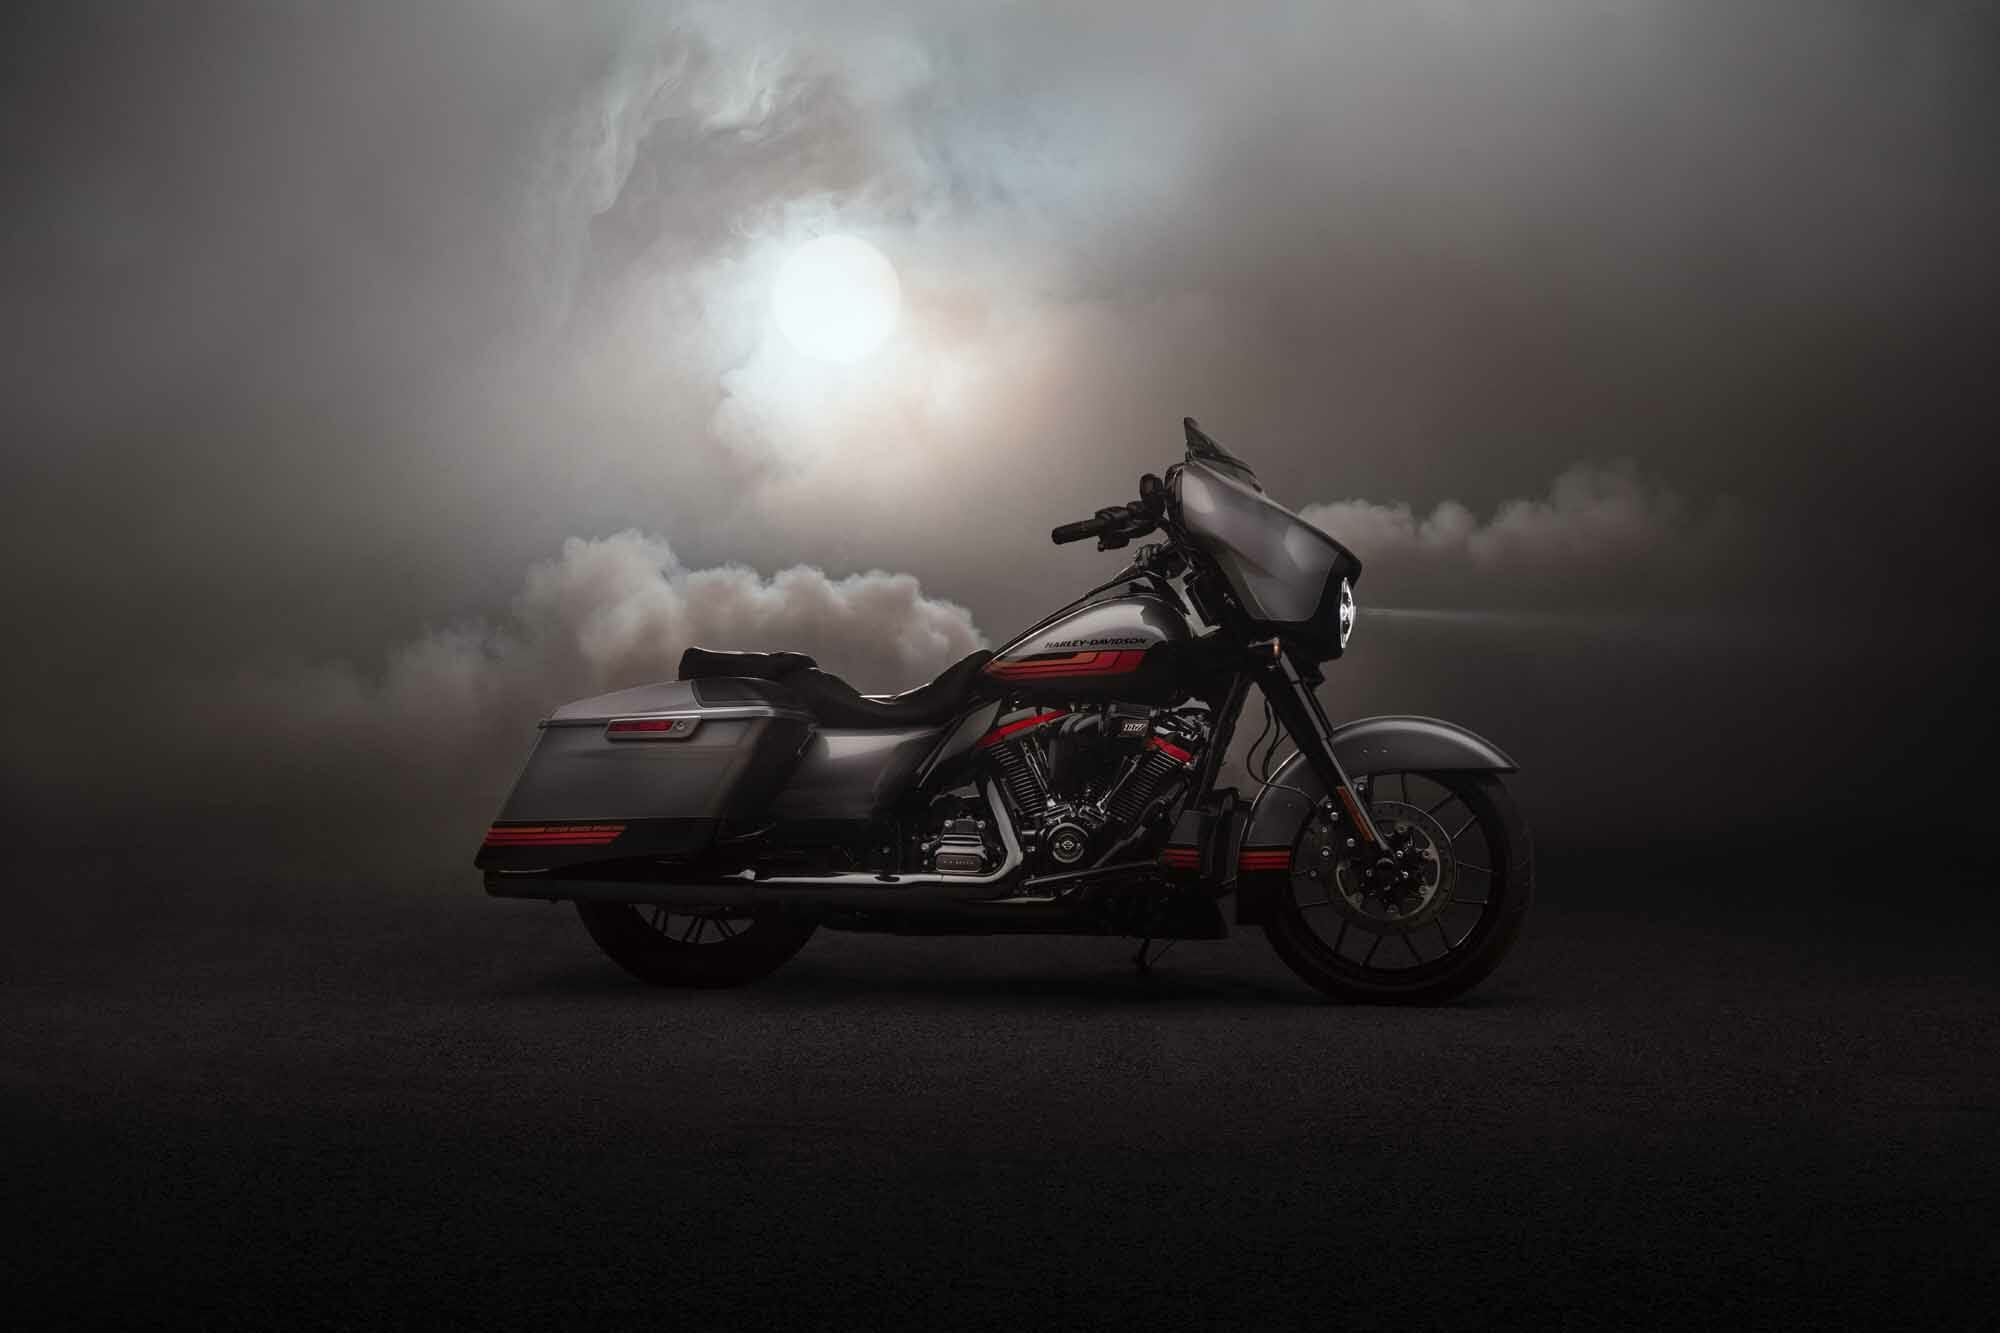 Harley recalls almost 200,000 Touring models to the workshops - MOTORCYCLES.NEWS